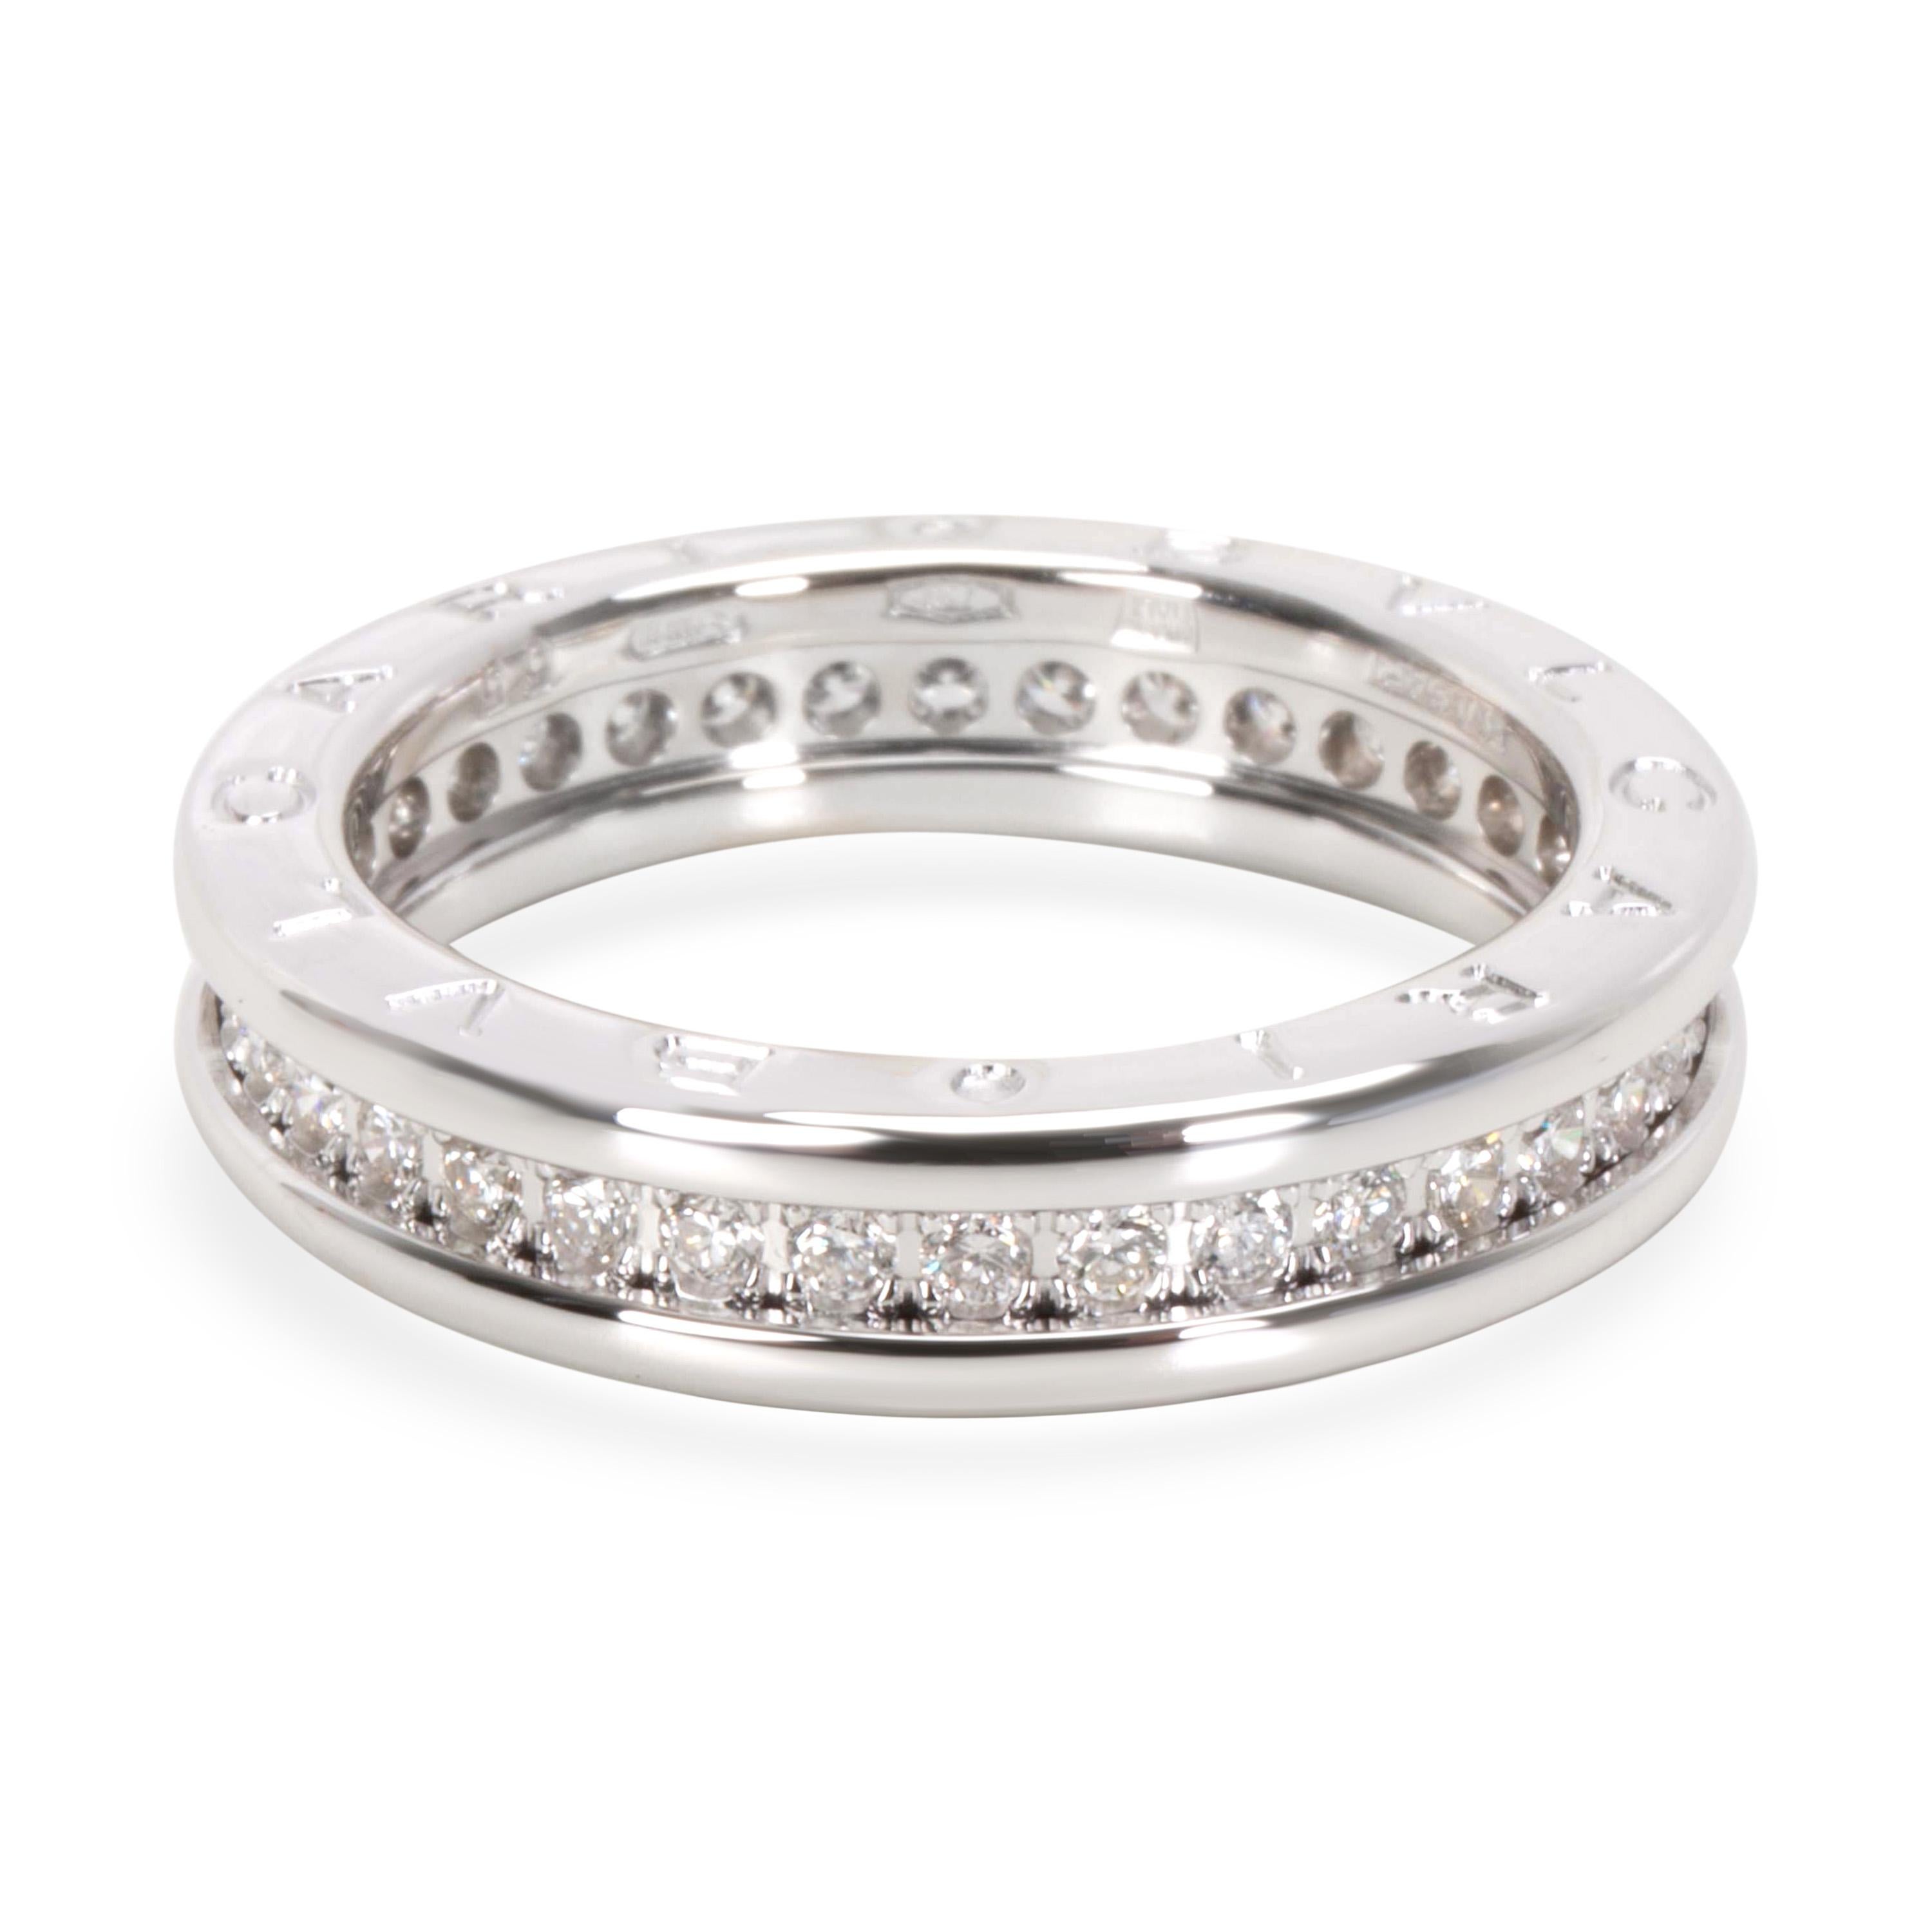 Bvlgari B. Zero Diamond Ring in 18K White Gold (1 CTW)

PRIMARY DETAILS
SKU: 097188
Listing Title: Bvlgari B. Zero Diamond Ring in 18K White Gold (1 CTW)
Condition Description: Retail price 6,350 USD. In excellent condition and recently polished.